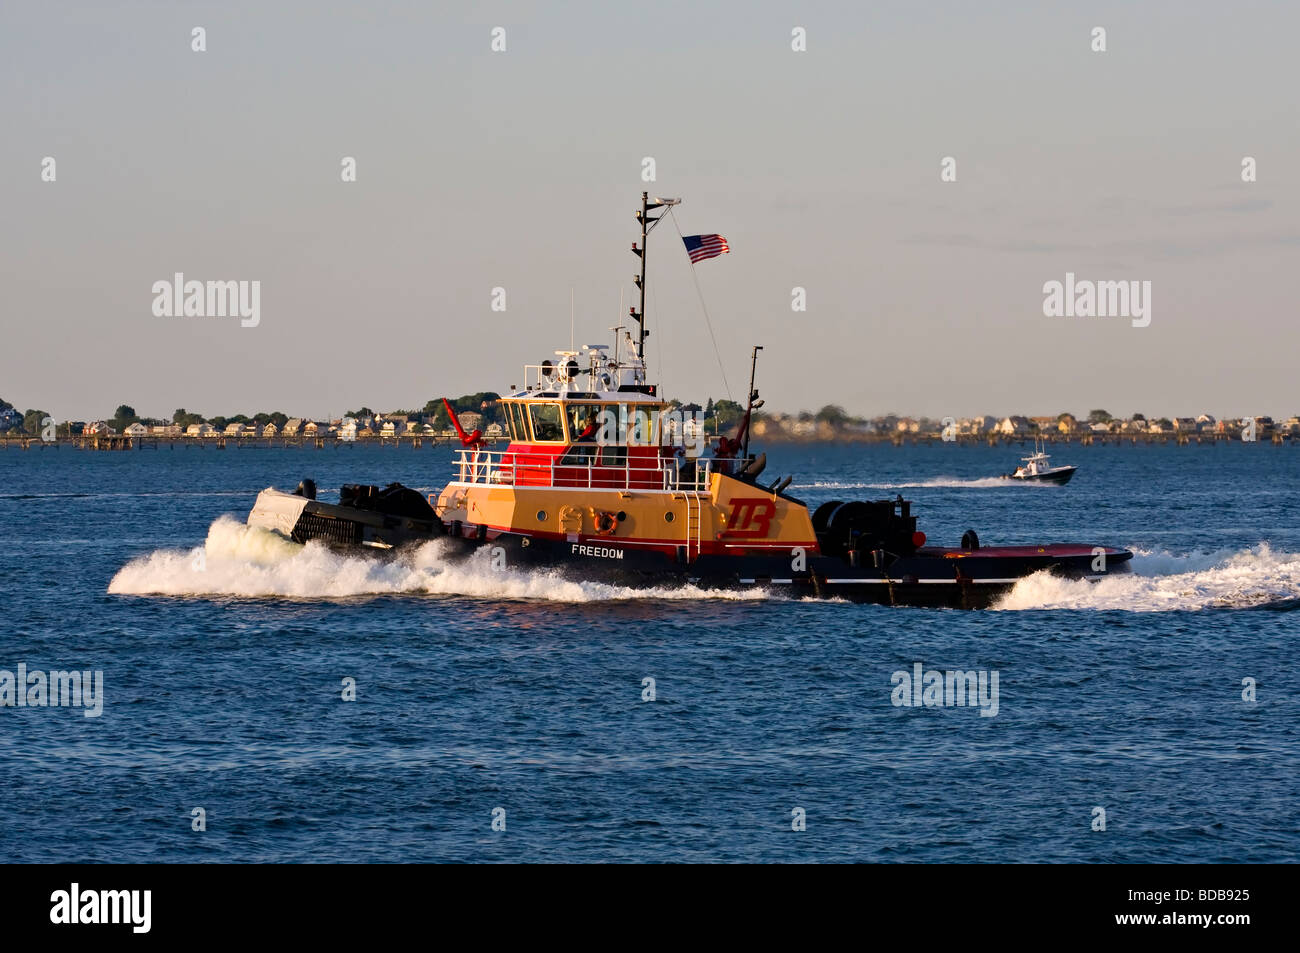 Tugboat 'Freedom' moving rapidly through the water in Boston Harbor. Stock Photo